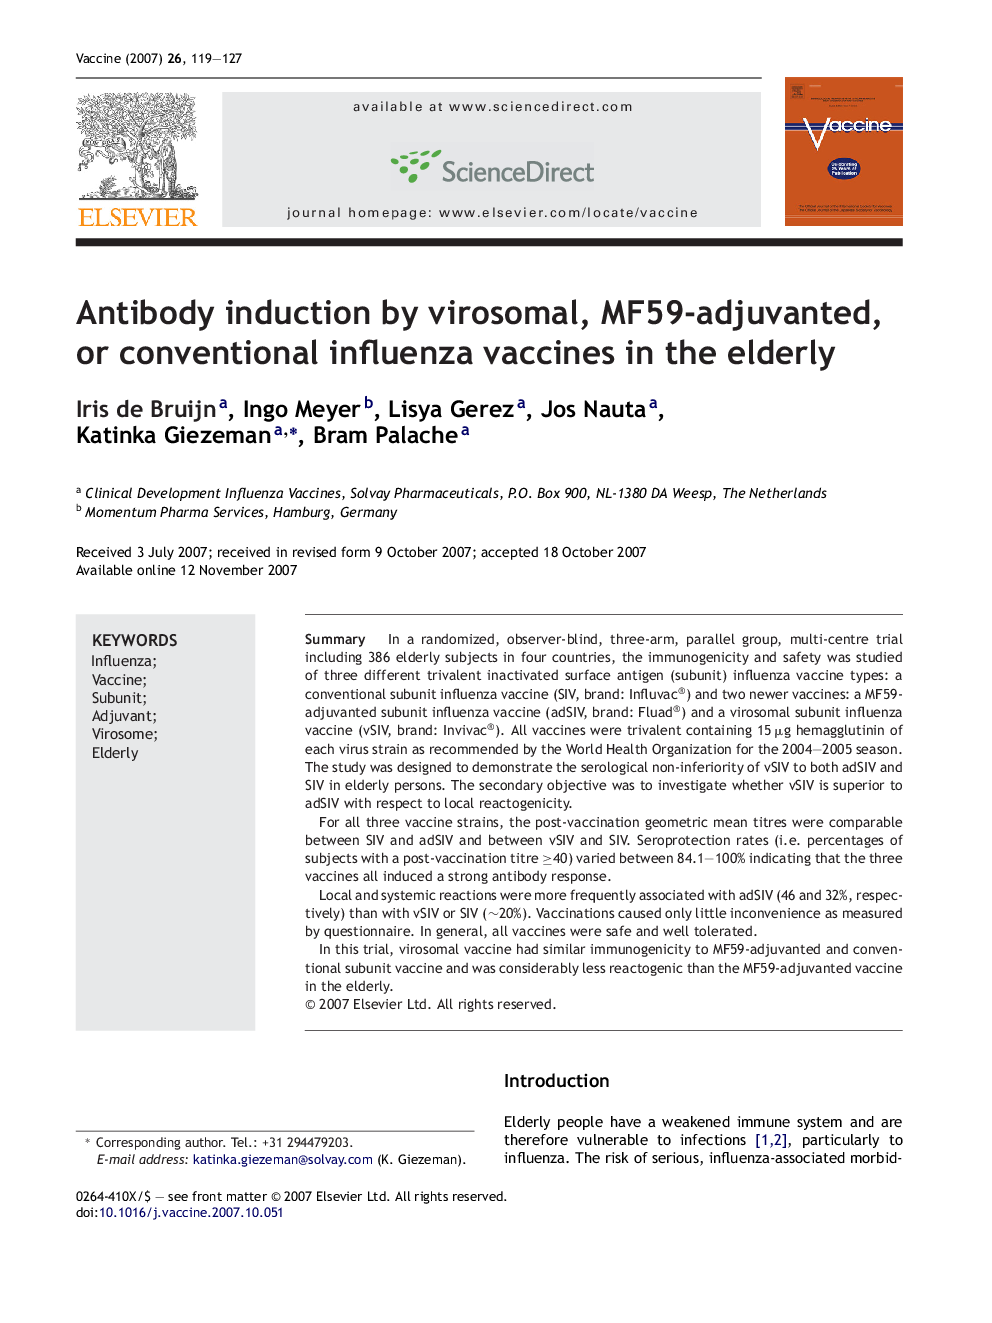 Antibody induction by virosomal, MF59-adjuvanted, or conventional influenza vaccines in the elderly